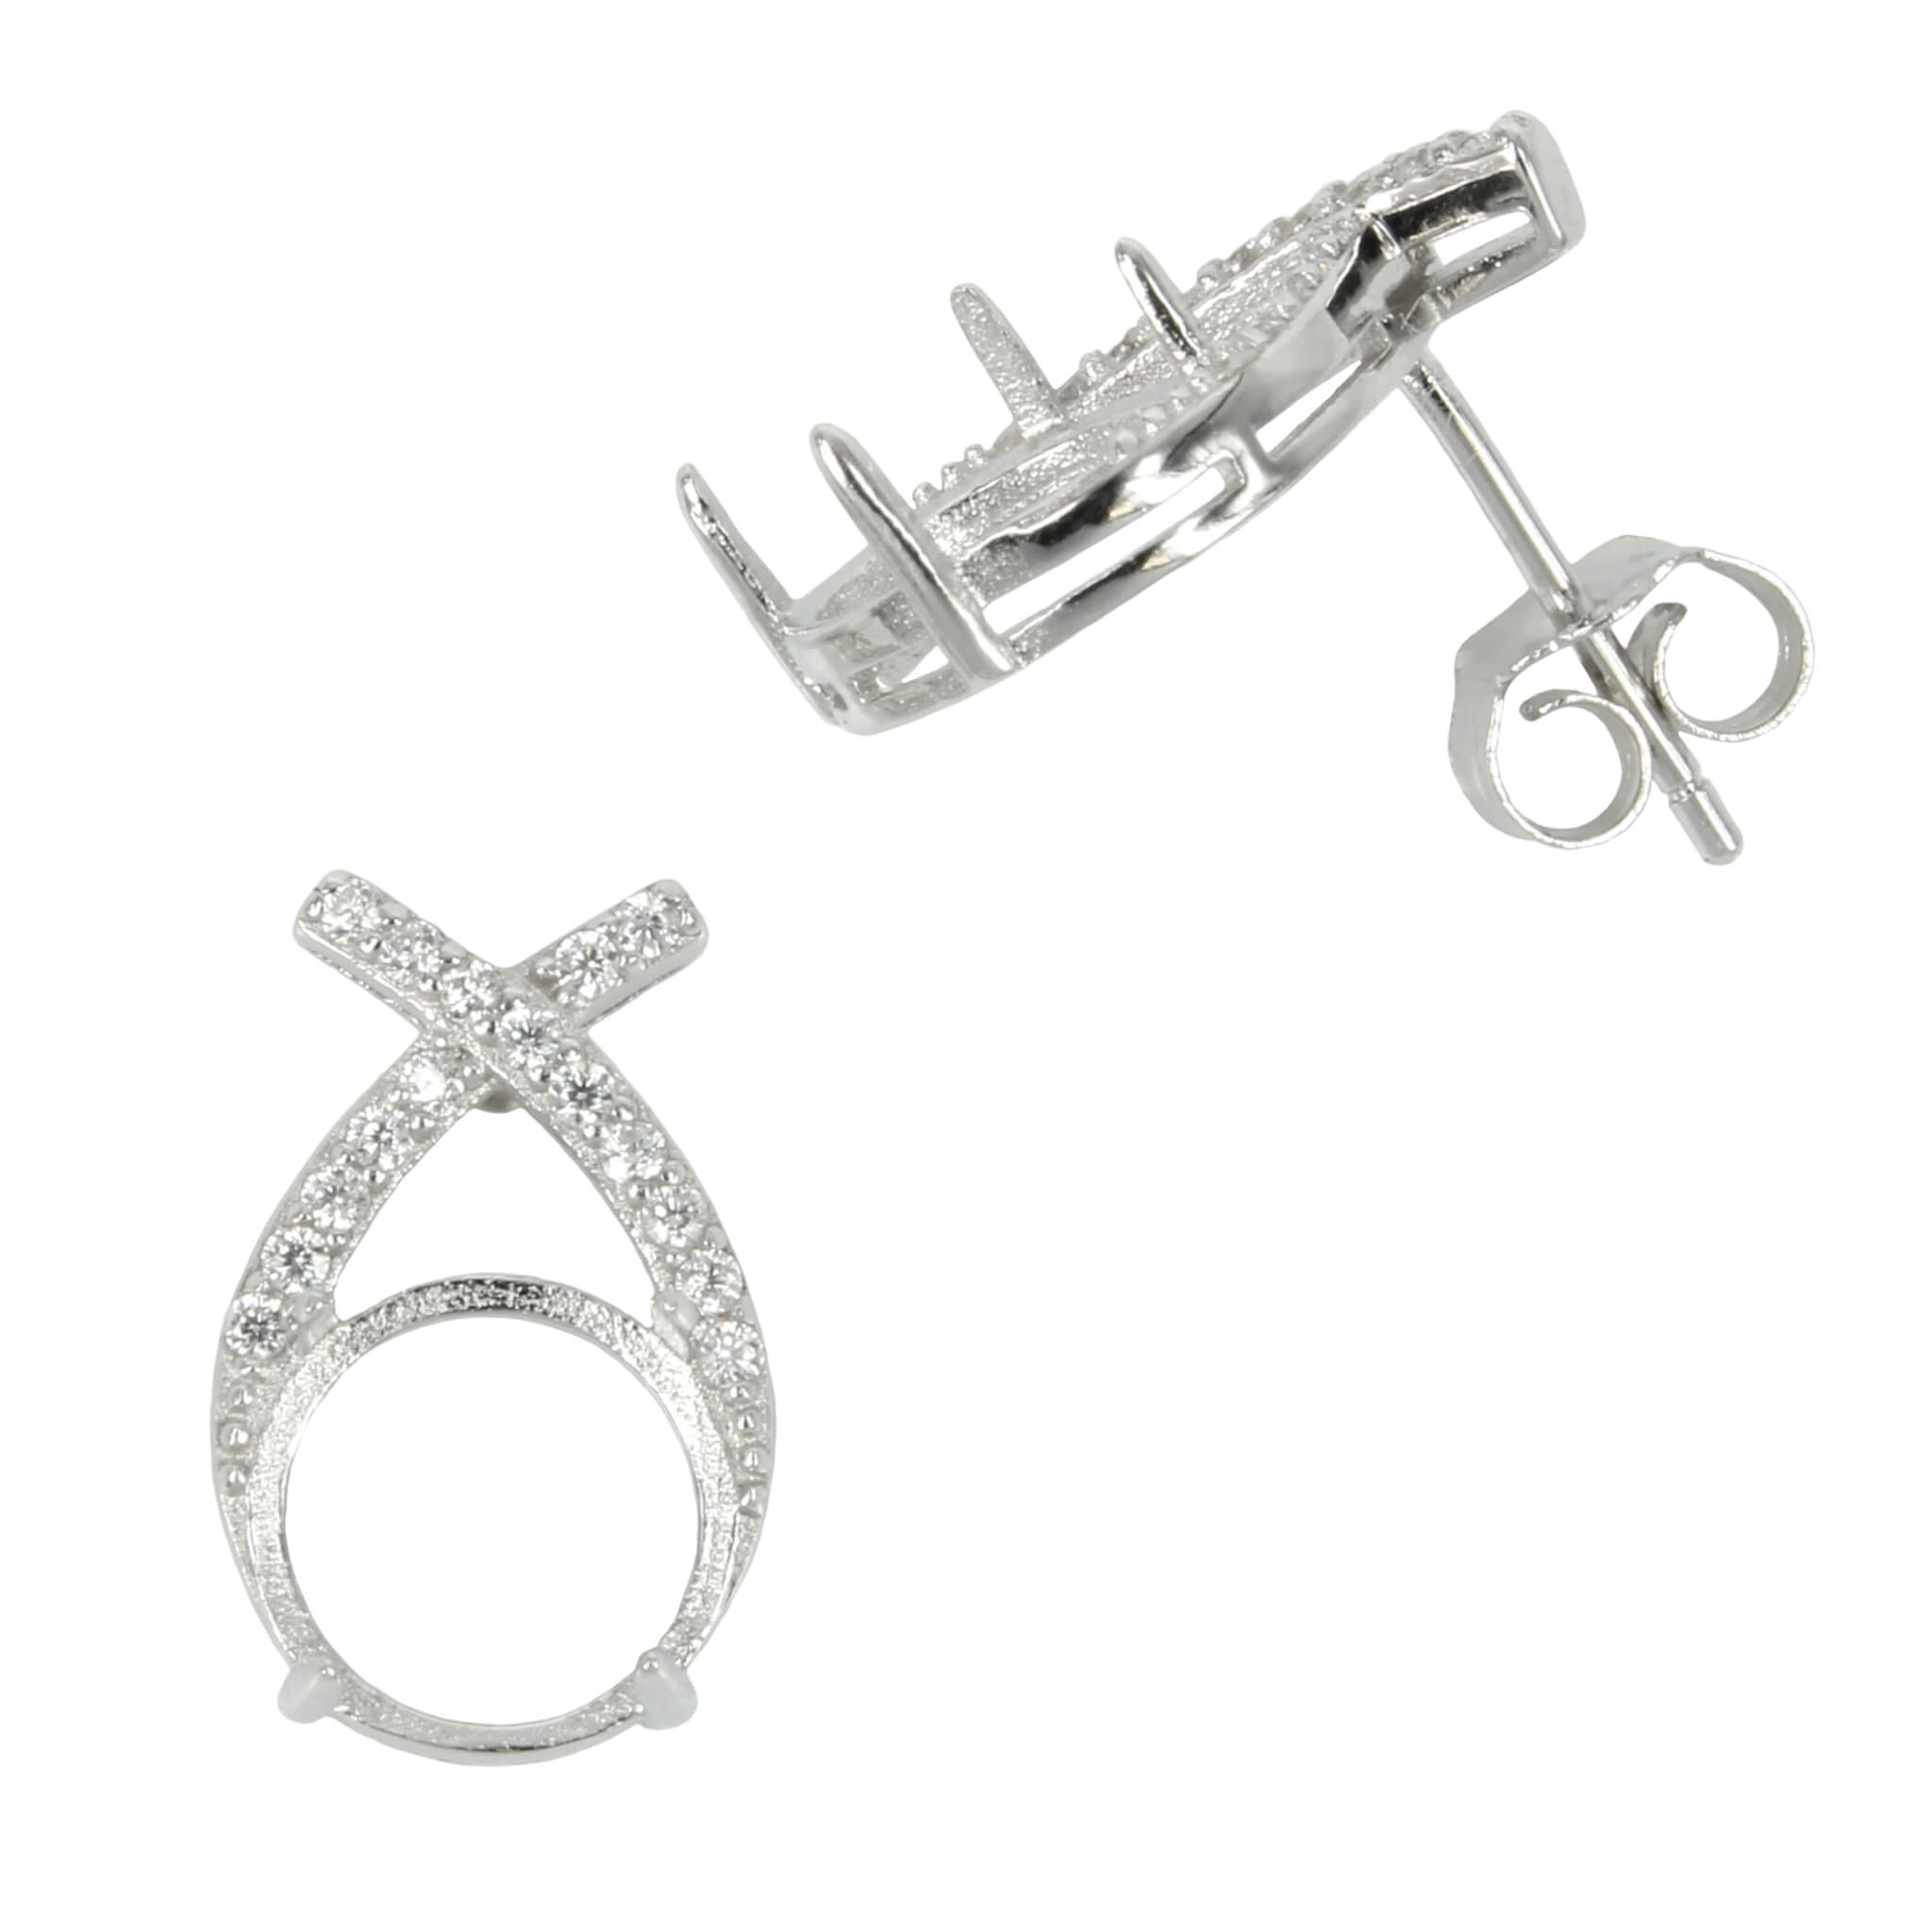 Crossed CZ Ribbons Stud Earrings with Round Prong Mounting in Sterling Silver for 8mm Stones